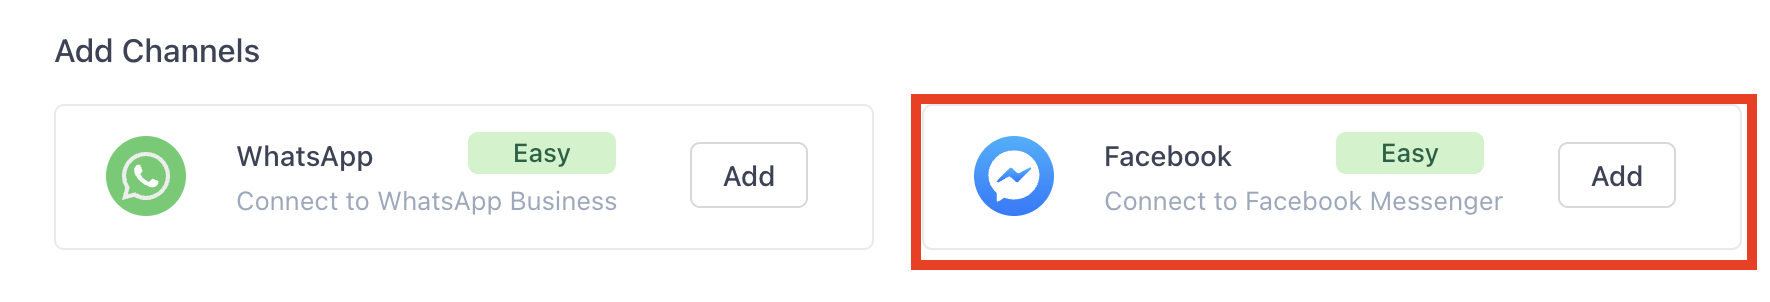 how to connect Facebook Messenger to SleekFlow 1